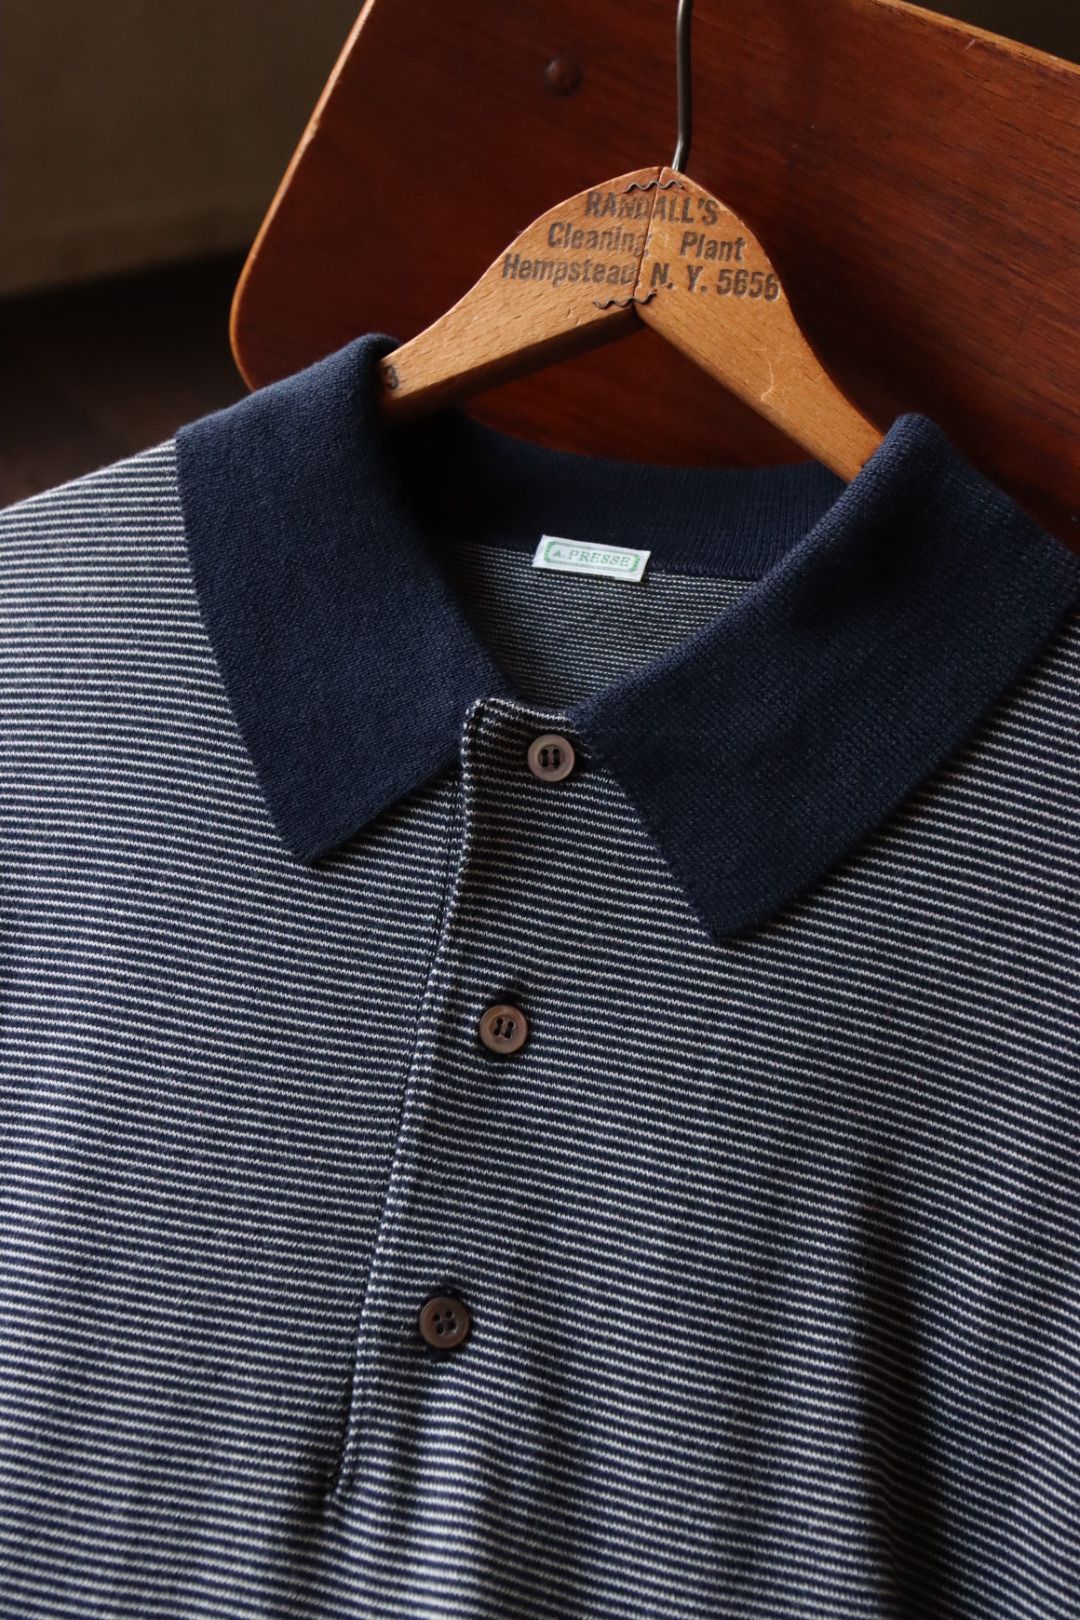 A.PRESSE - アプレッセ24SS ポロシャツ High Gauge L/S Striped Polo ...